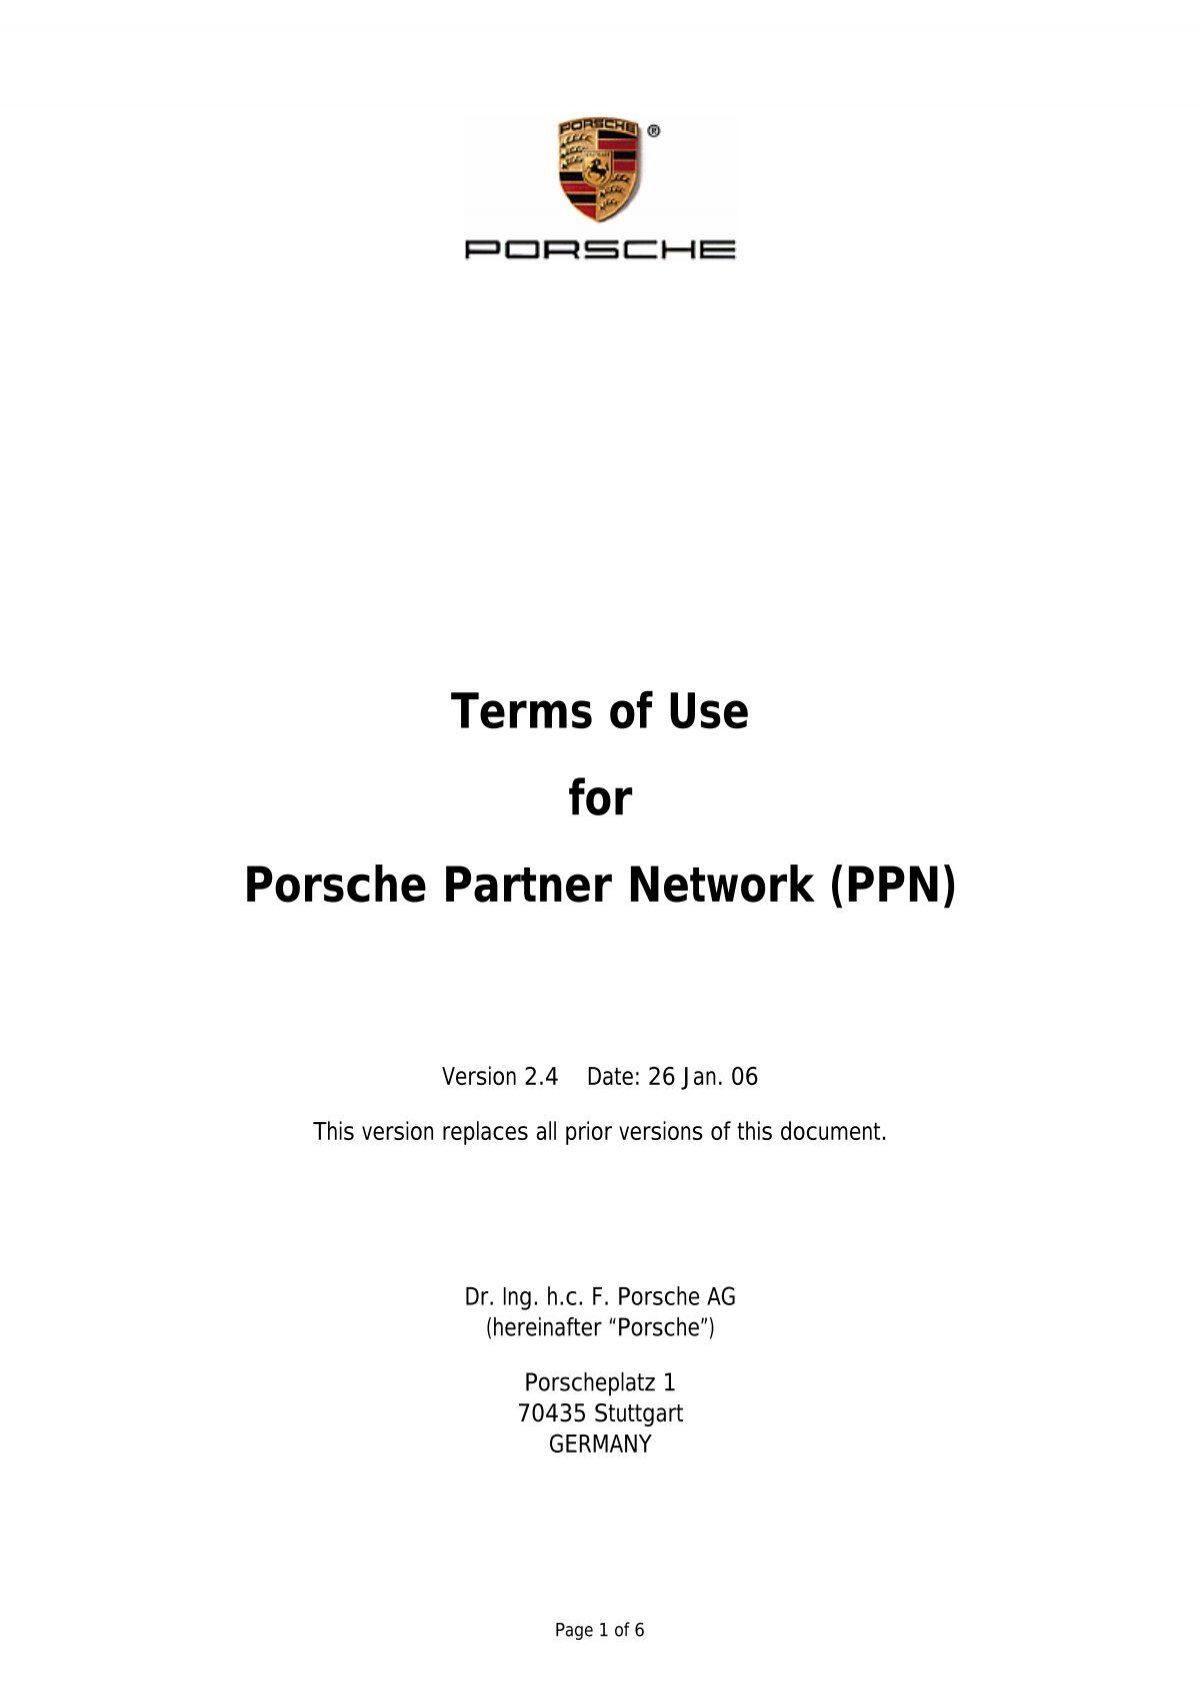 Terms Of Use For Porsche Partner Network PPN 